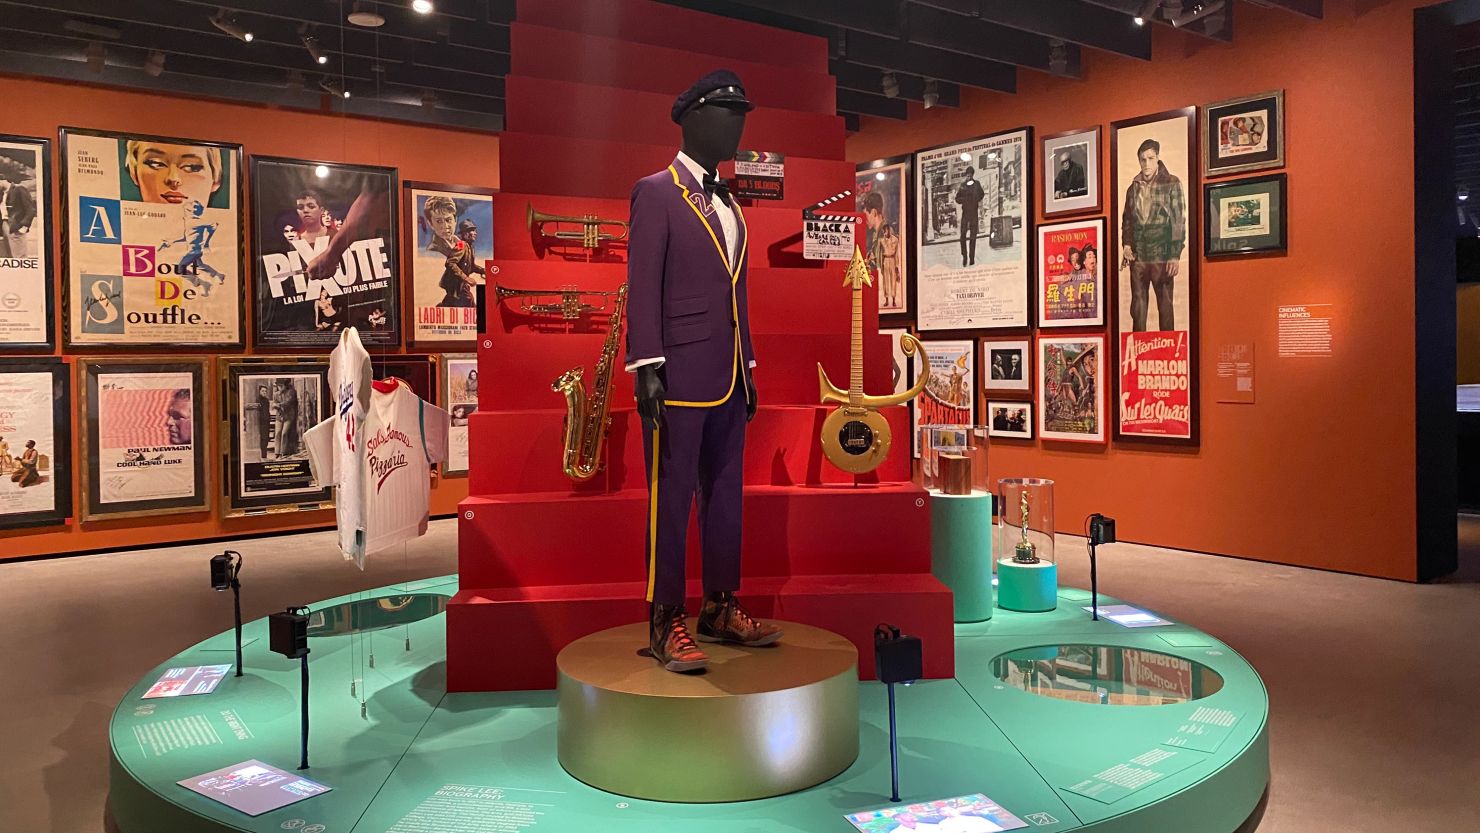 Director Spike Lee's suit, which he wore in honor of Kobe Bryant to the 2019 Oscars,  is among the items on display at the Academy of Motion Pictures Museum.